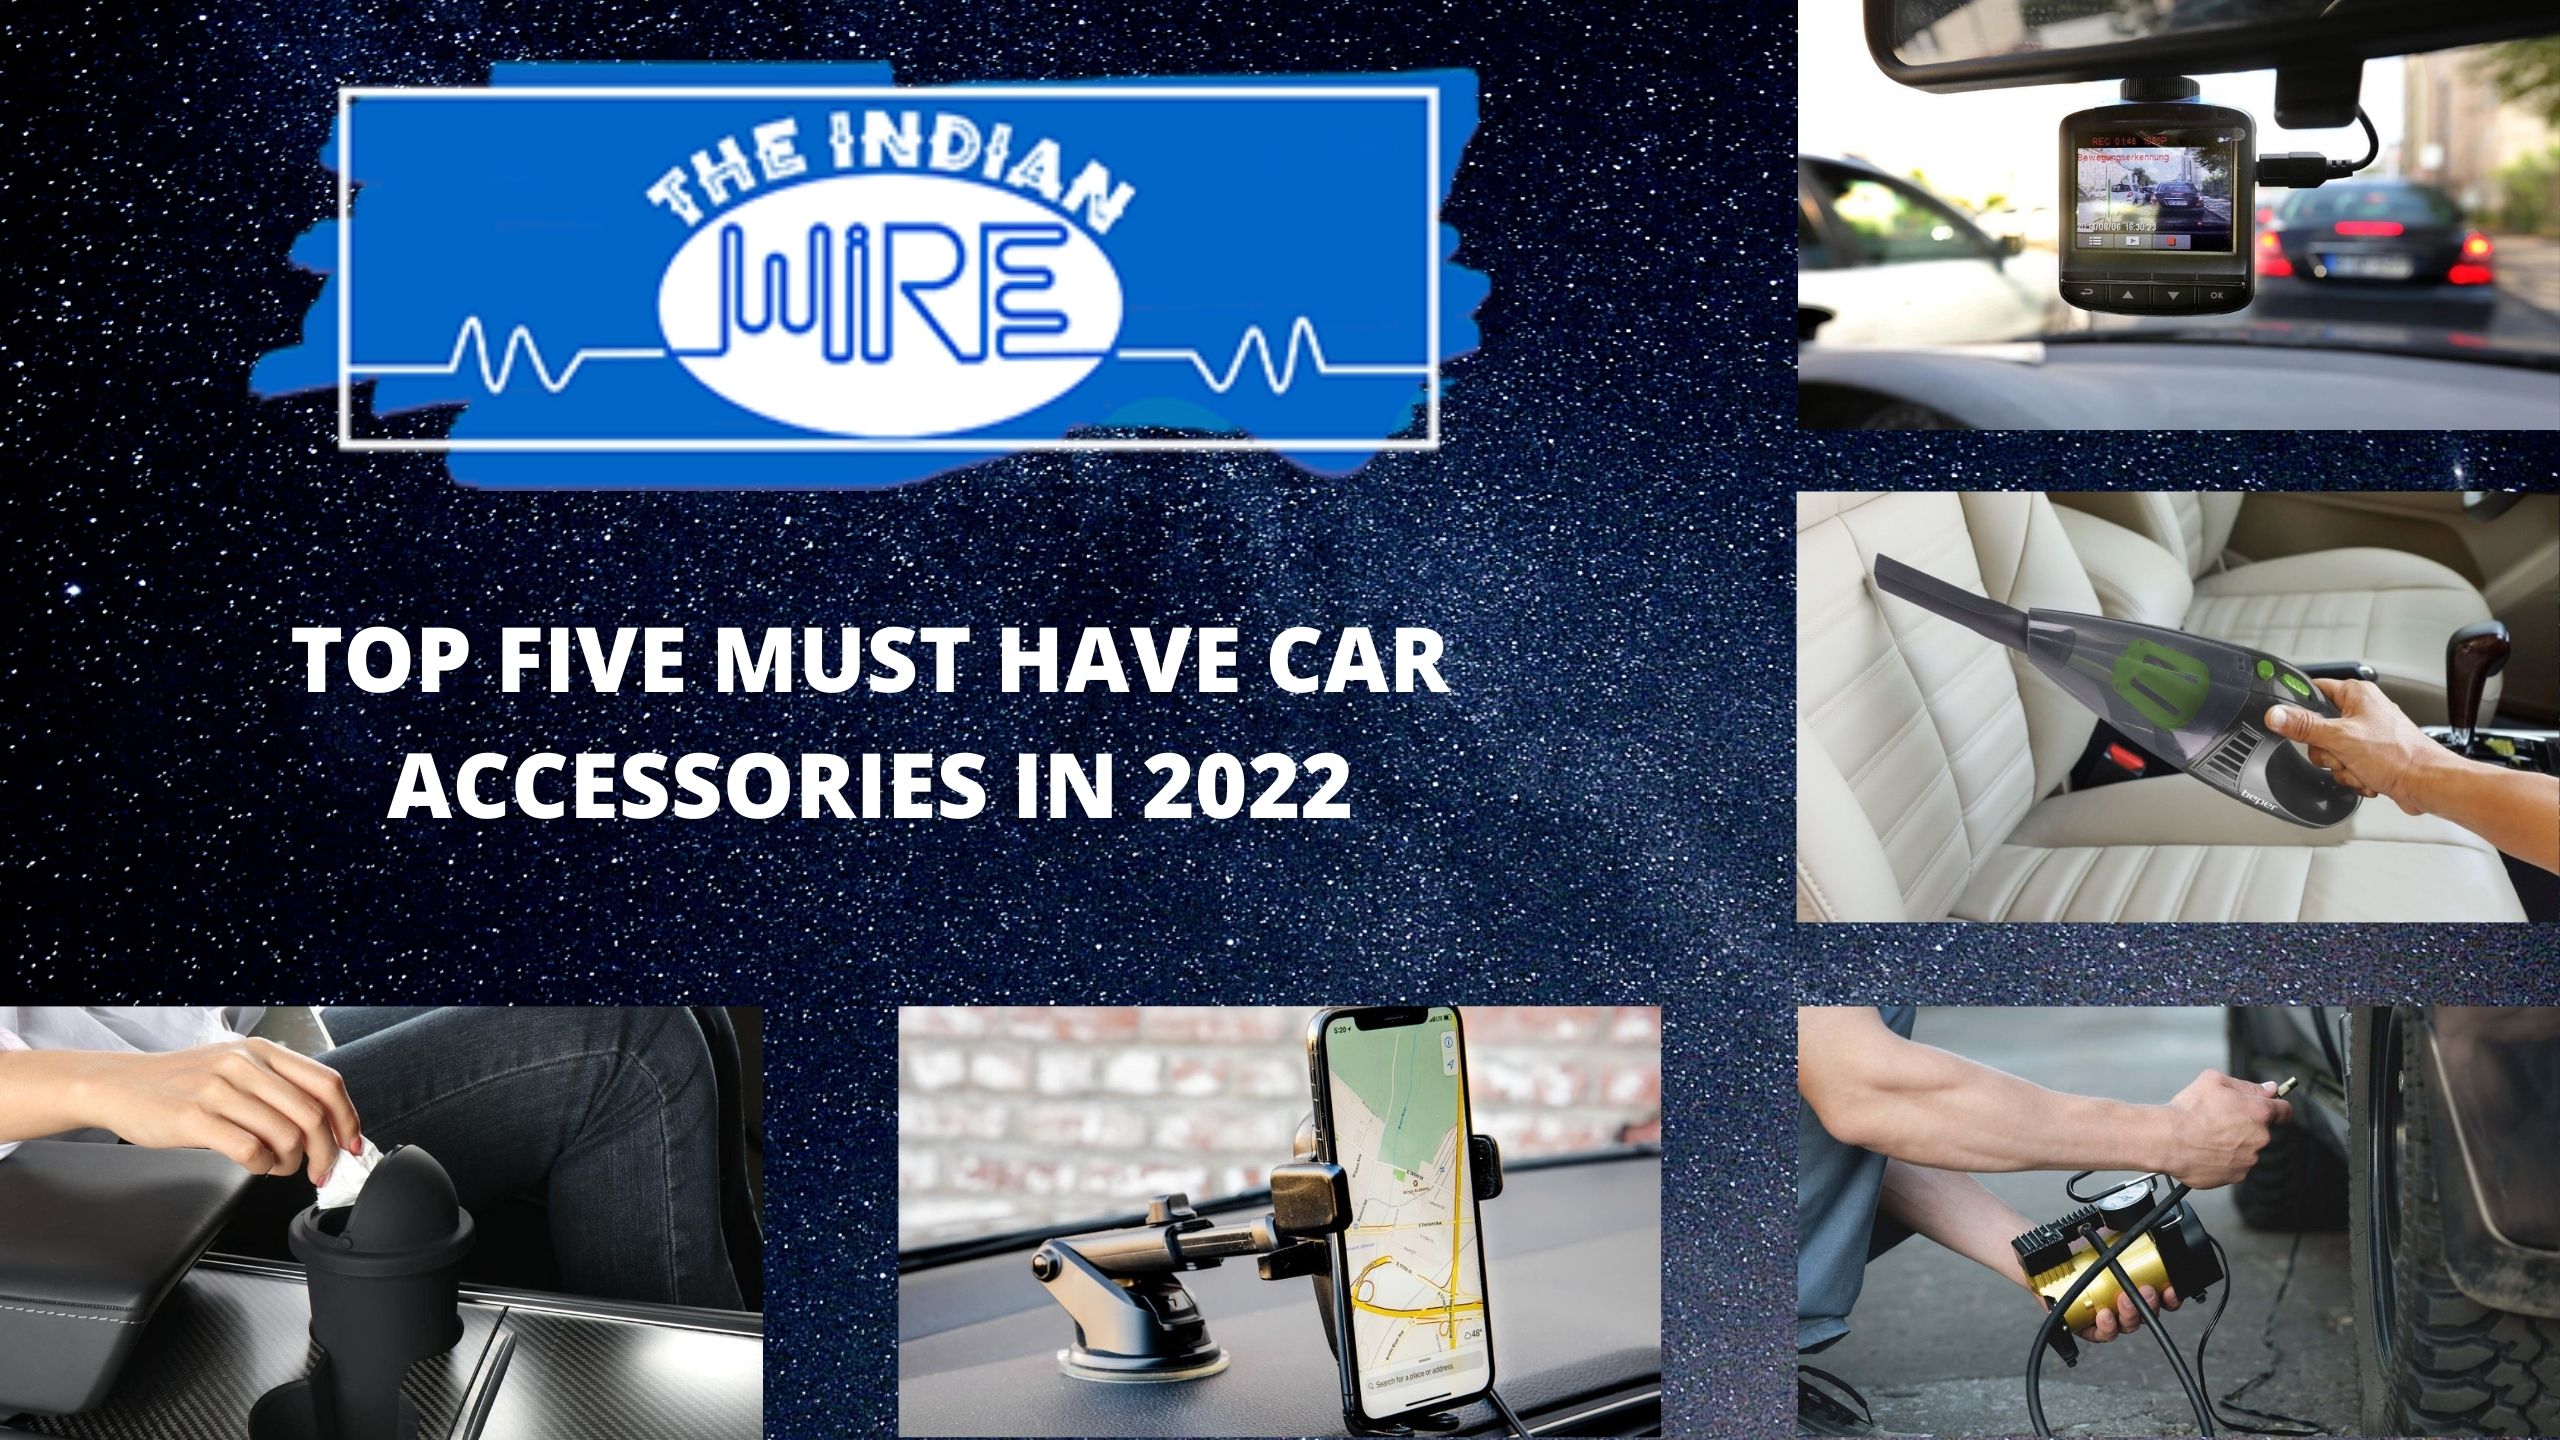 Top 5 must have car accessories in 2022